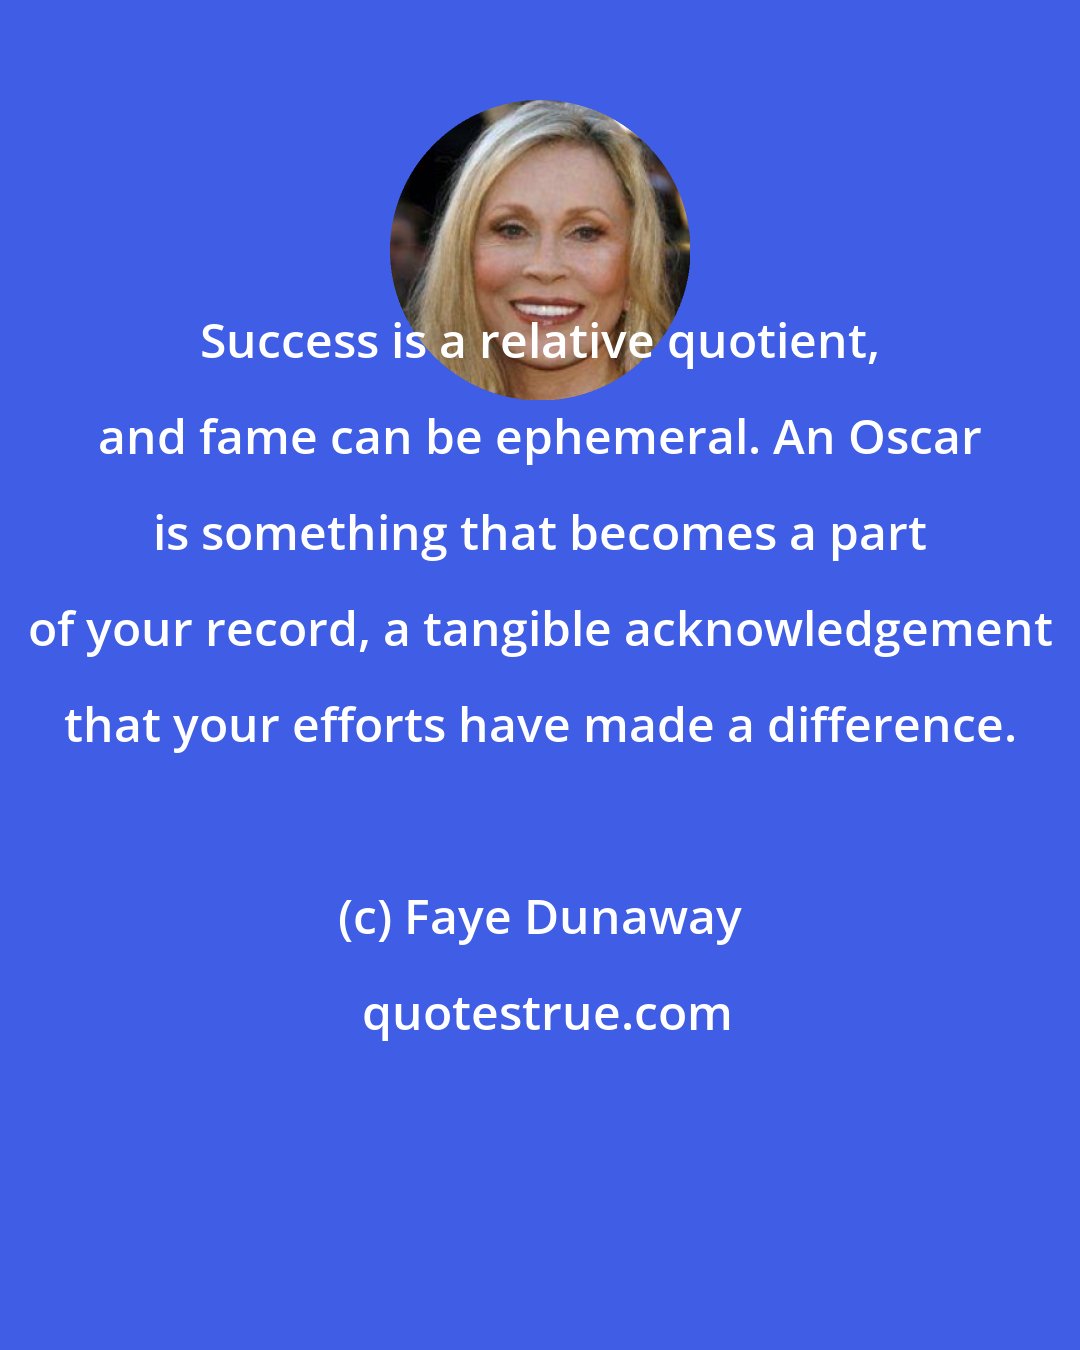 Faye Dunaway: Success is a relative quotient, and fame can be ephemeral. An Oscar is something that becomes a part of your record, a tangible acknowledgement that your efforts have made a difference.